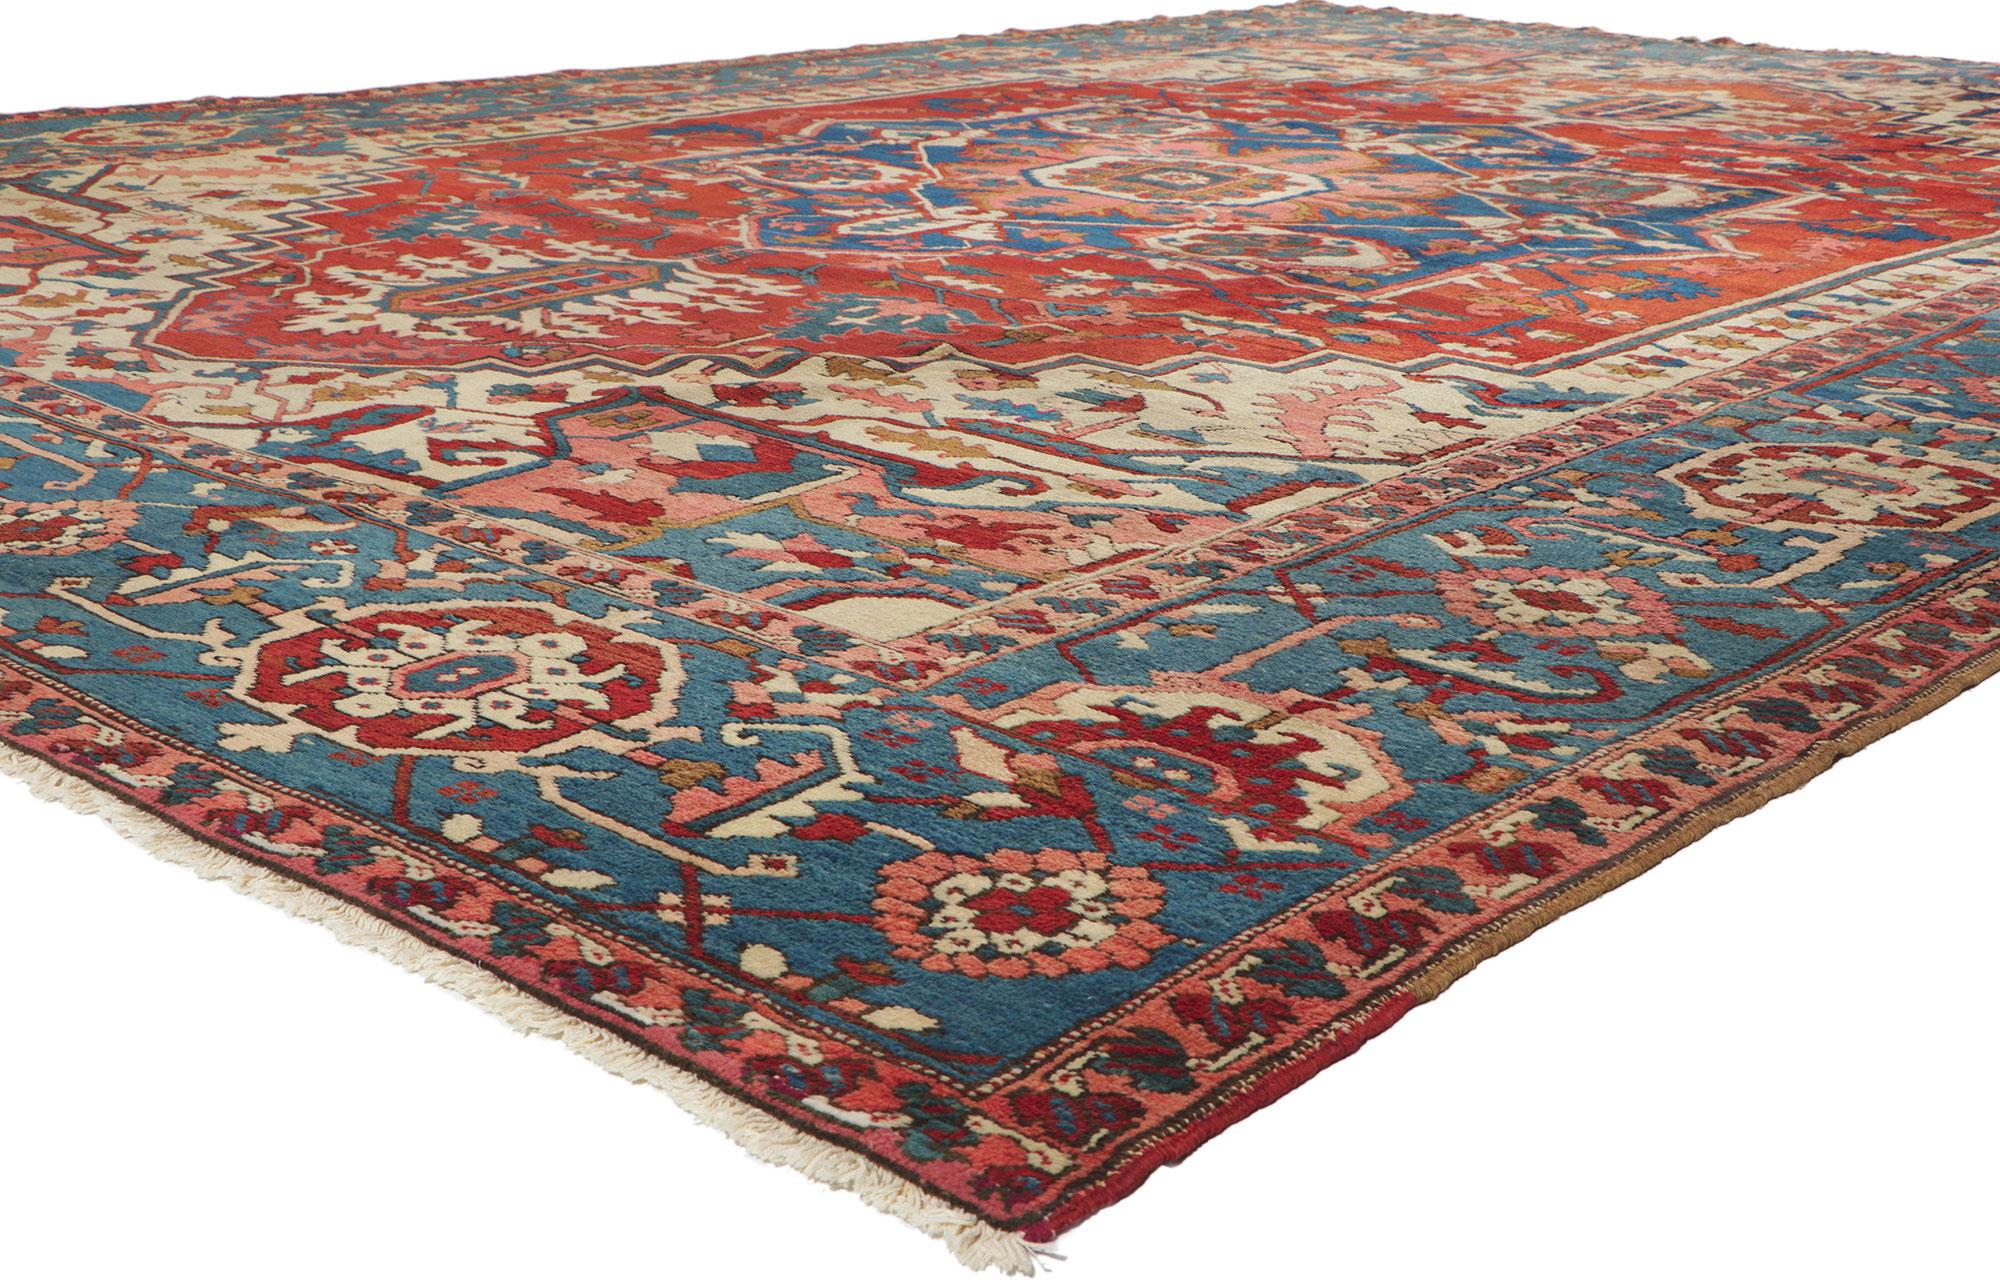 78331 Antique Persian Serapi rug, 11'03 x 15'04. With its effortless beauty and timeless appeal, this hand knotted wool antique Persian rug can beautifully blend modern, contemporary, and traditional interiors. A large-scale octagonal medallion